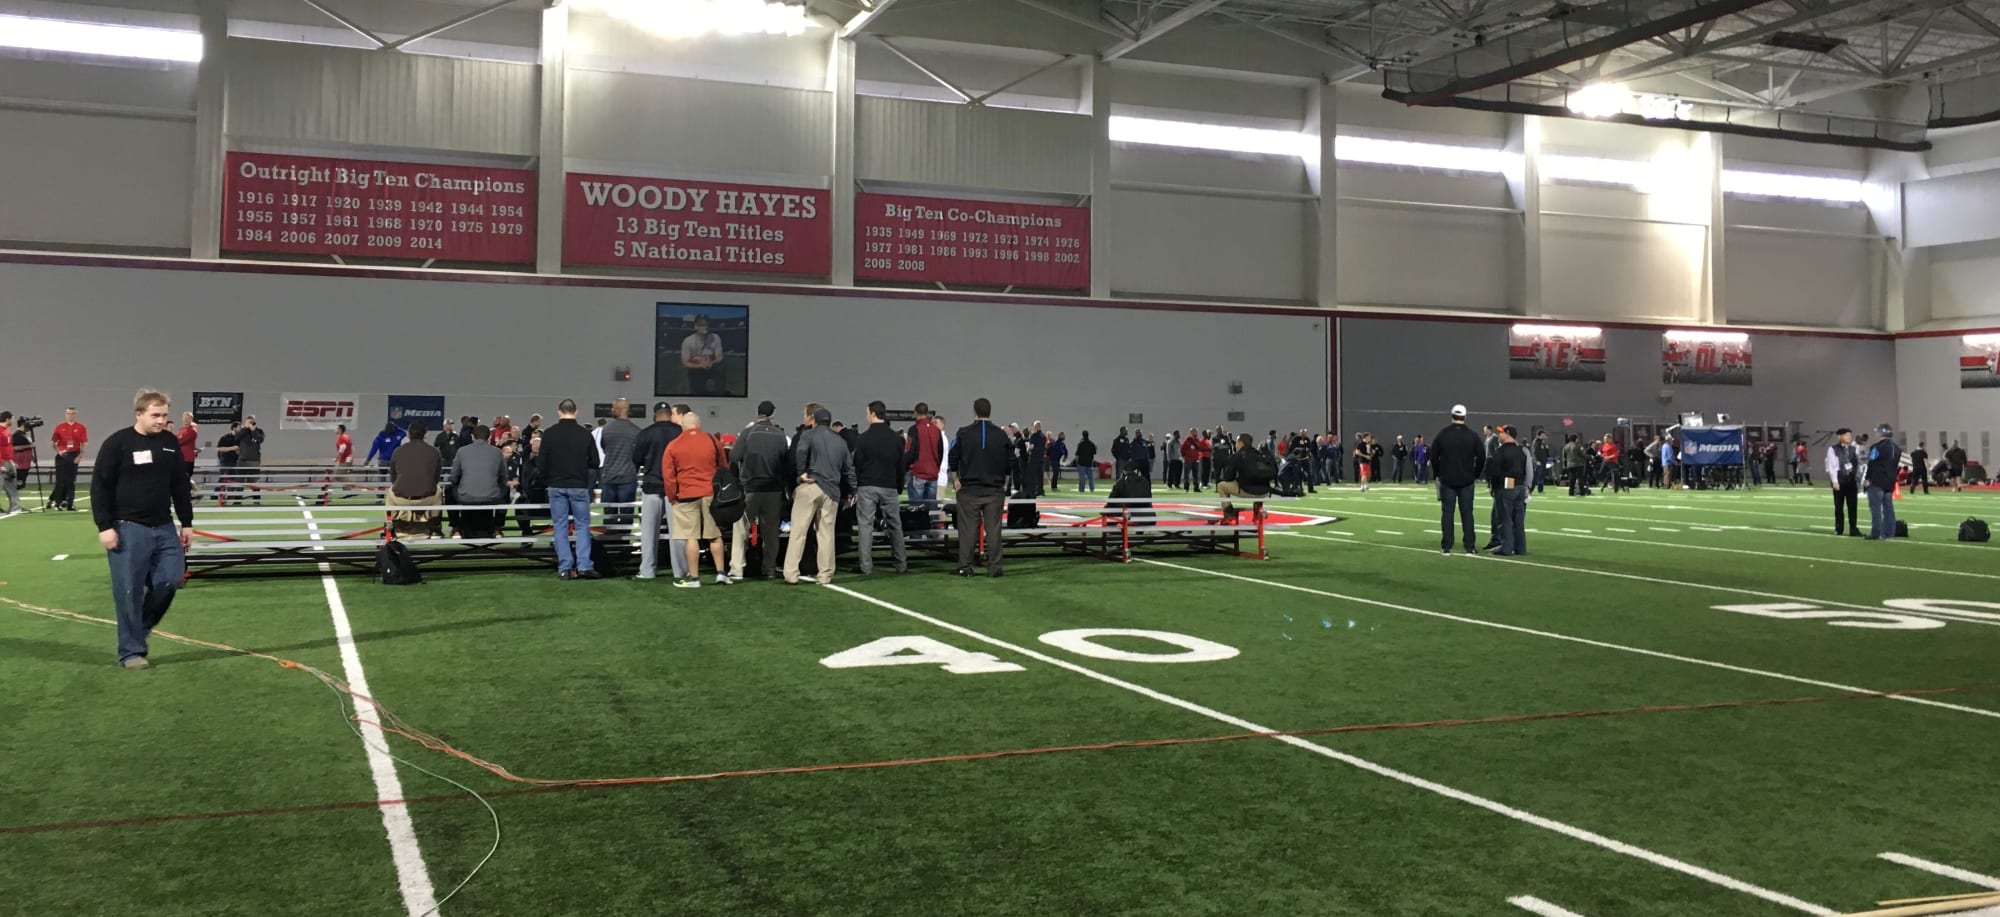 Players from Ohio State's Pro Day the Buccaneers Could Draft